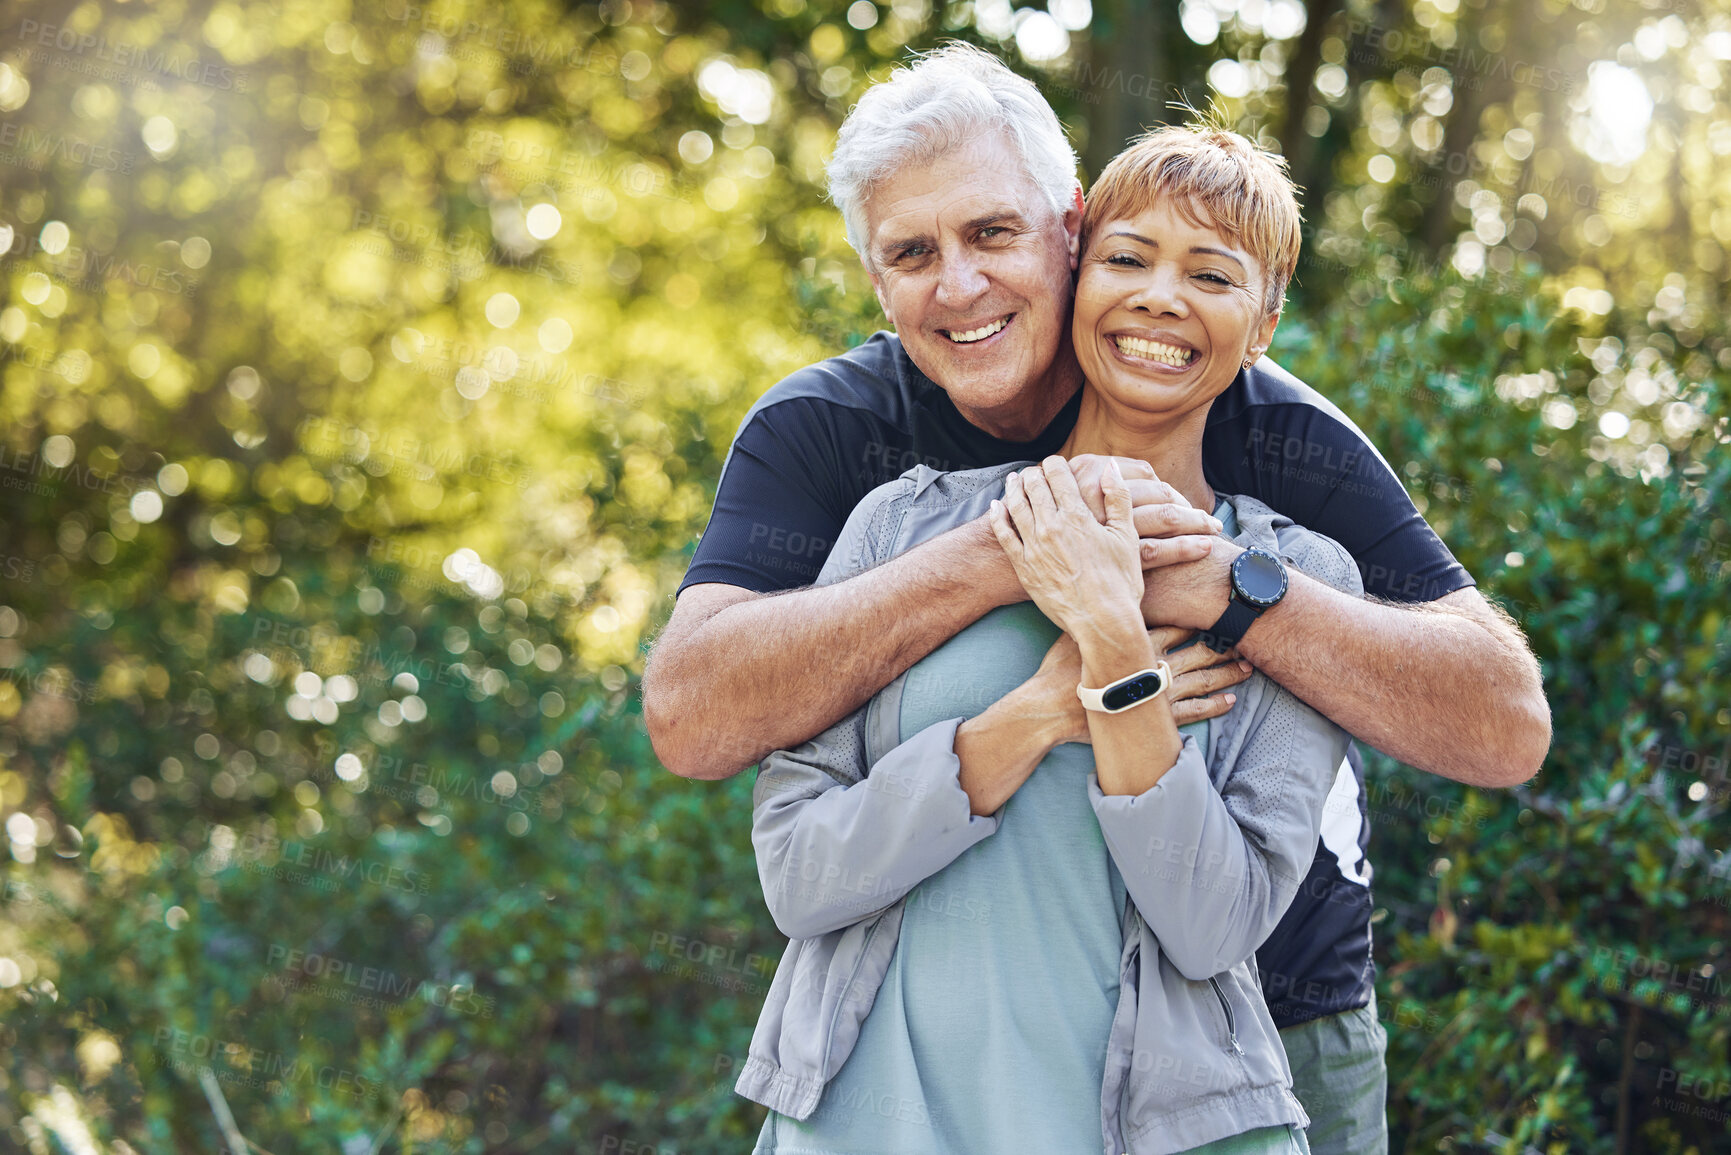 Buy stock photo Nature, love and man hugging his wife with care, happiness and affection while on an outdoor walk. Happy, romance and portrait of a senior couple in retirement embracing in the forest, woods or park.